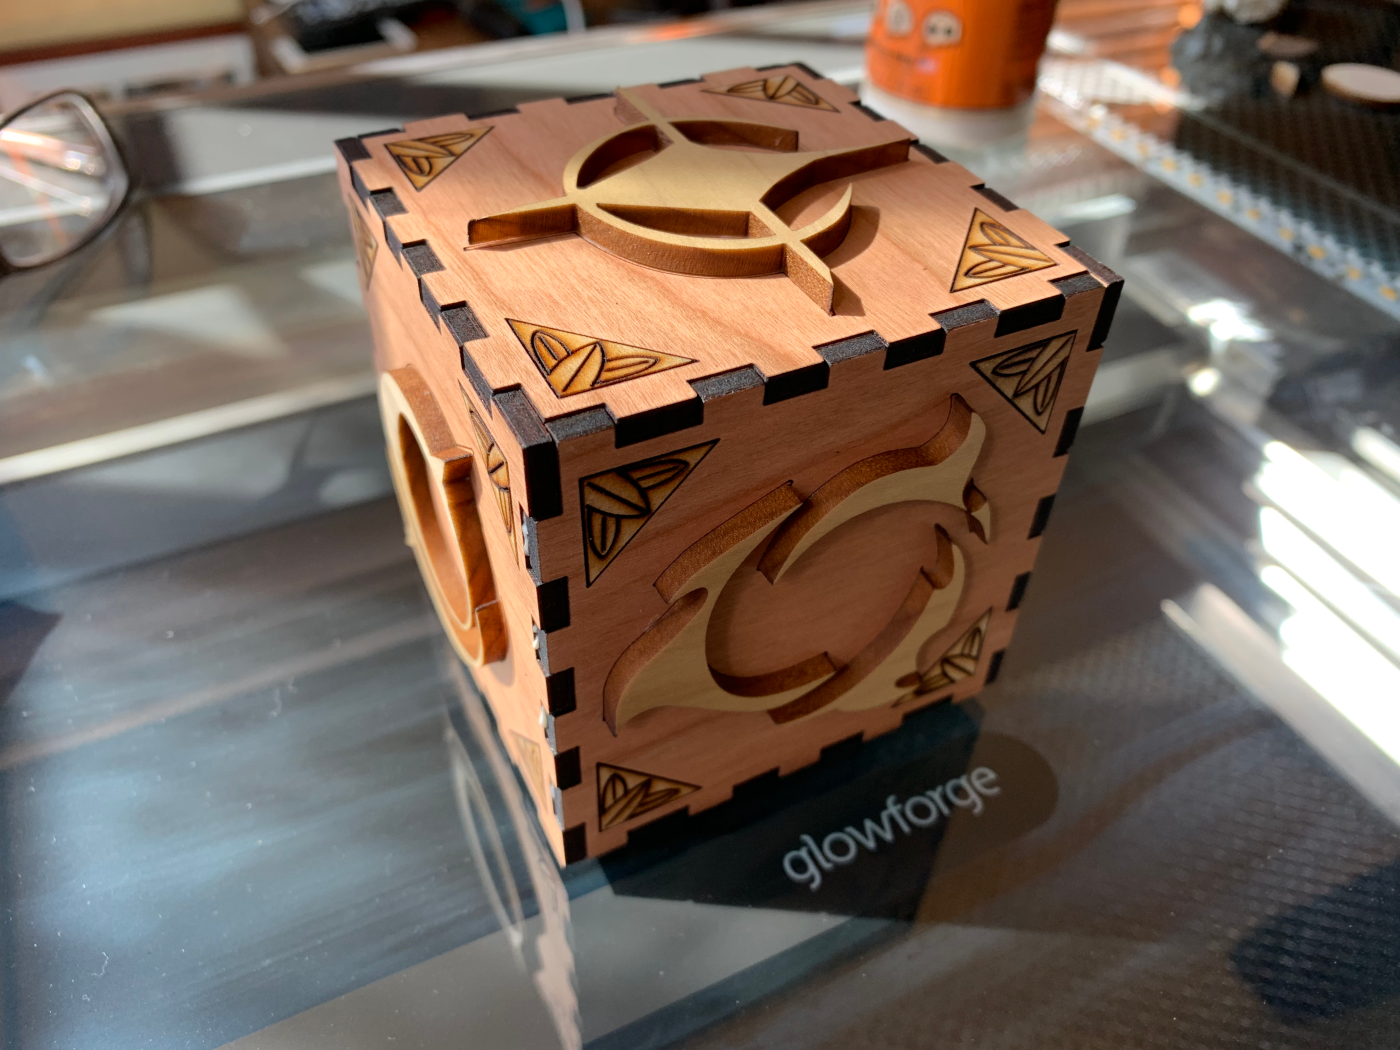 Glowforge, Lessons Learned – For the Love of Learning